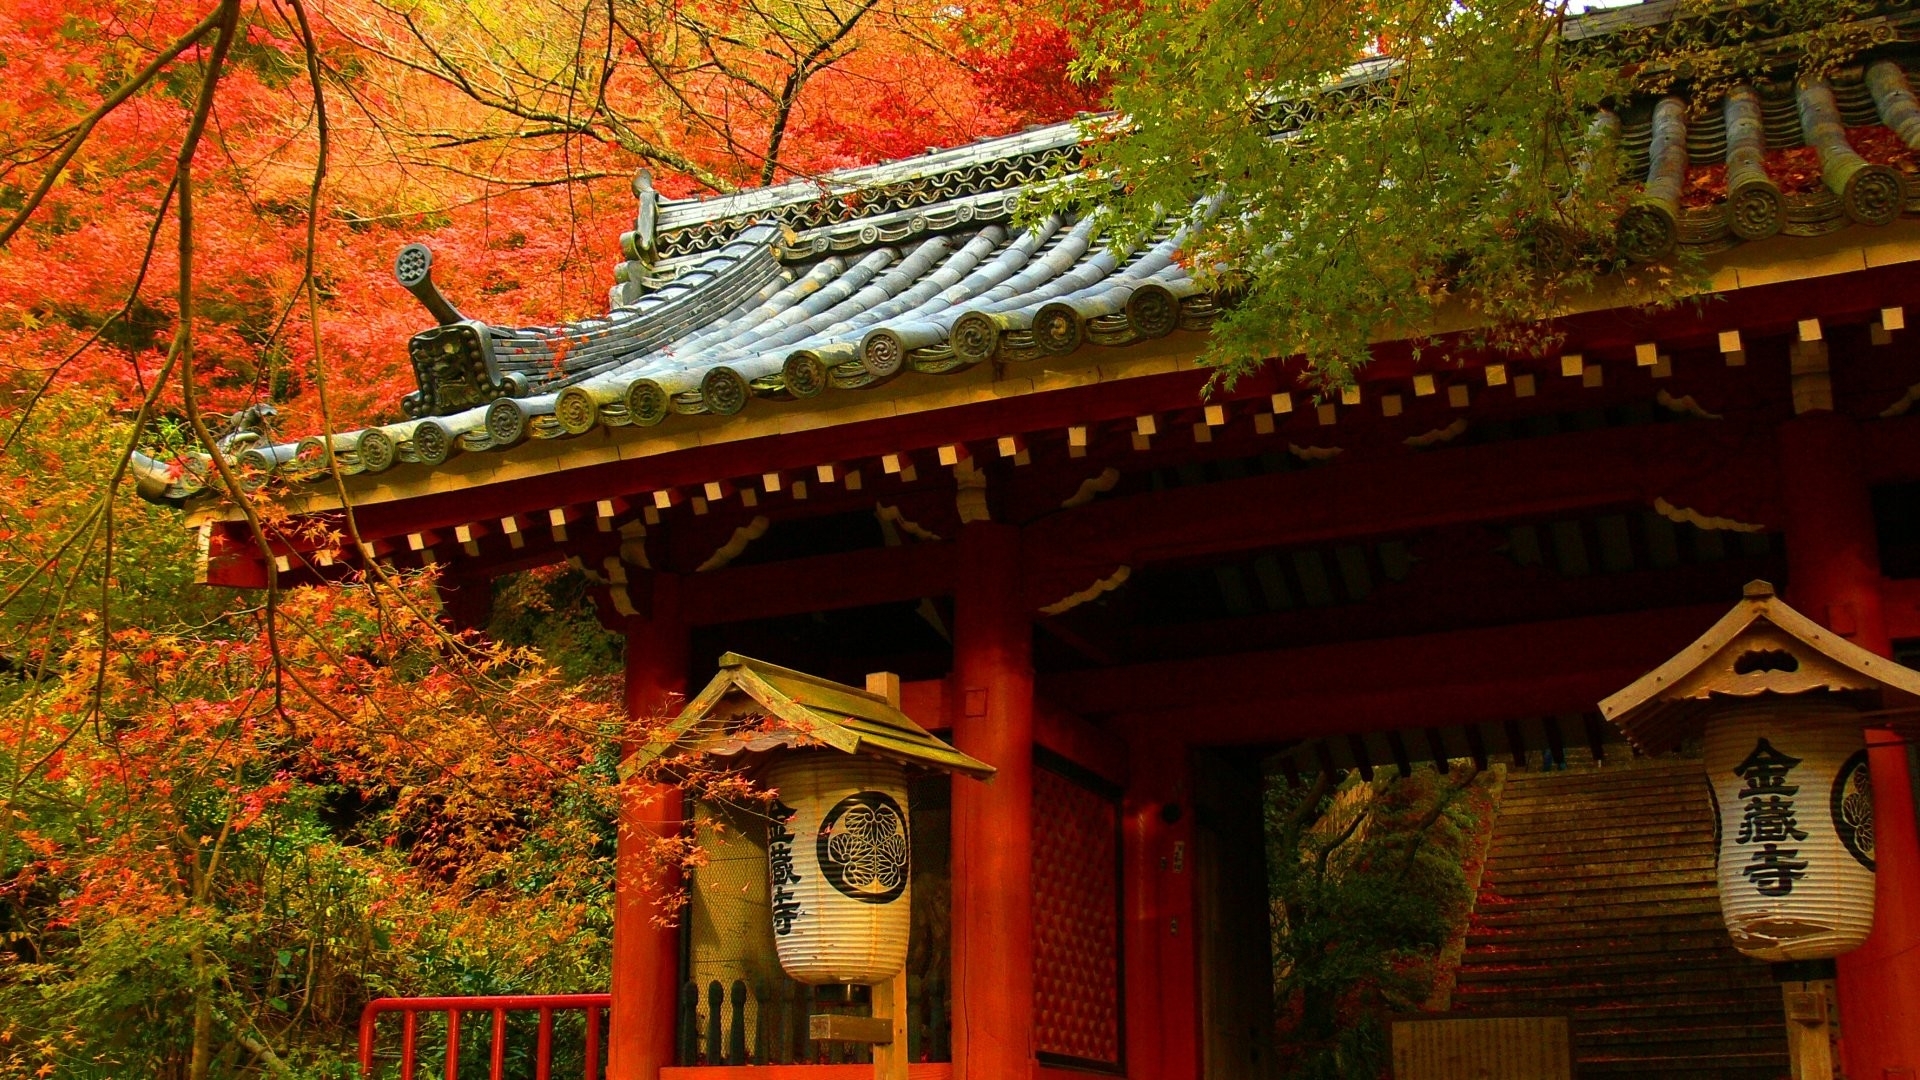 japanese, Asian, Oriental, Architecture, Buildings, Houses, Wood, Teak, Artistic, Roof, Tiles, Nature, Trees, Forest, Autumn, Fall, Seasons, Leaves, Color Wallpaper